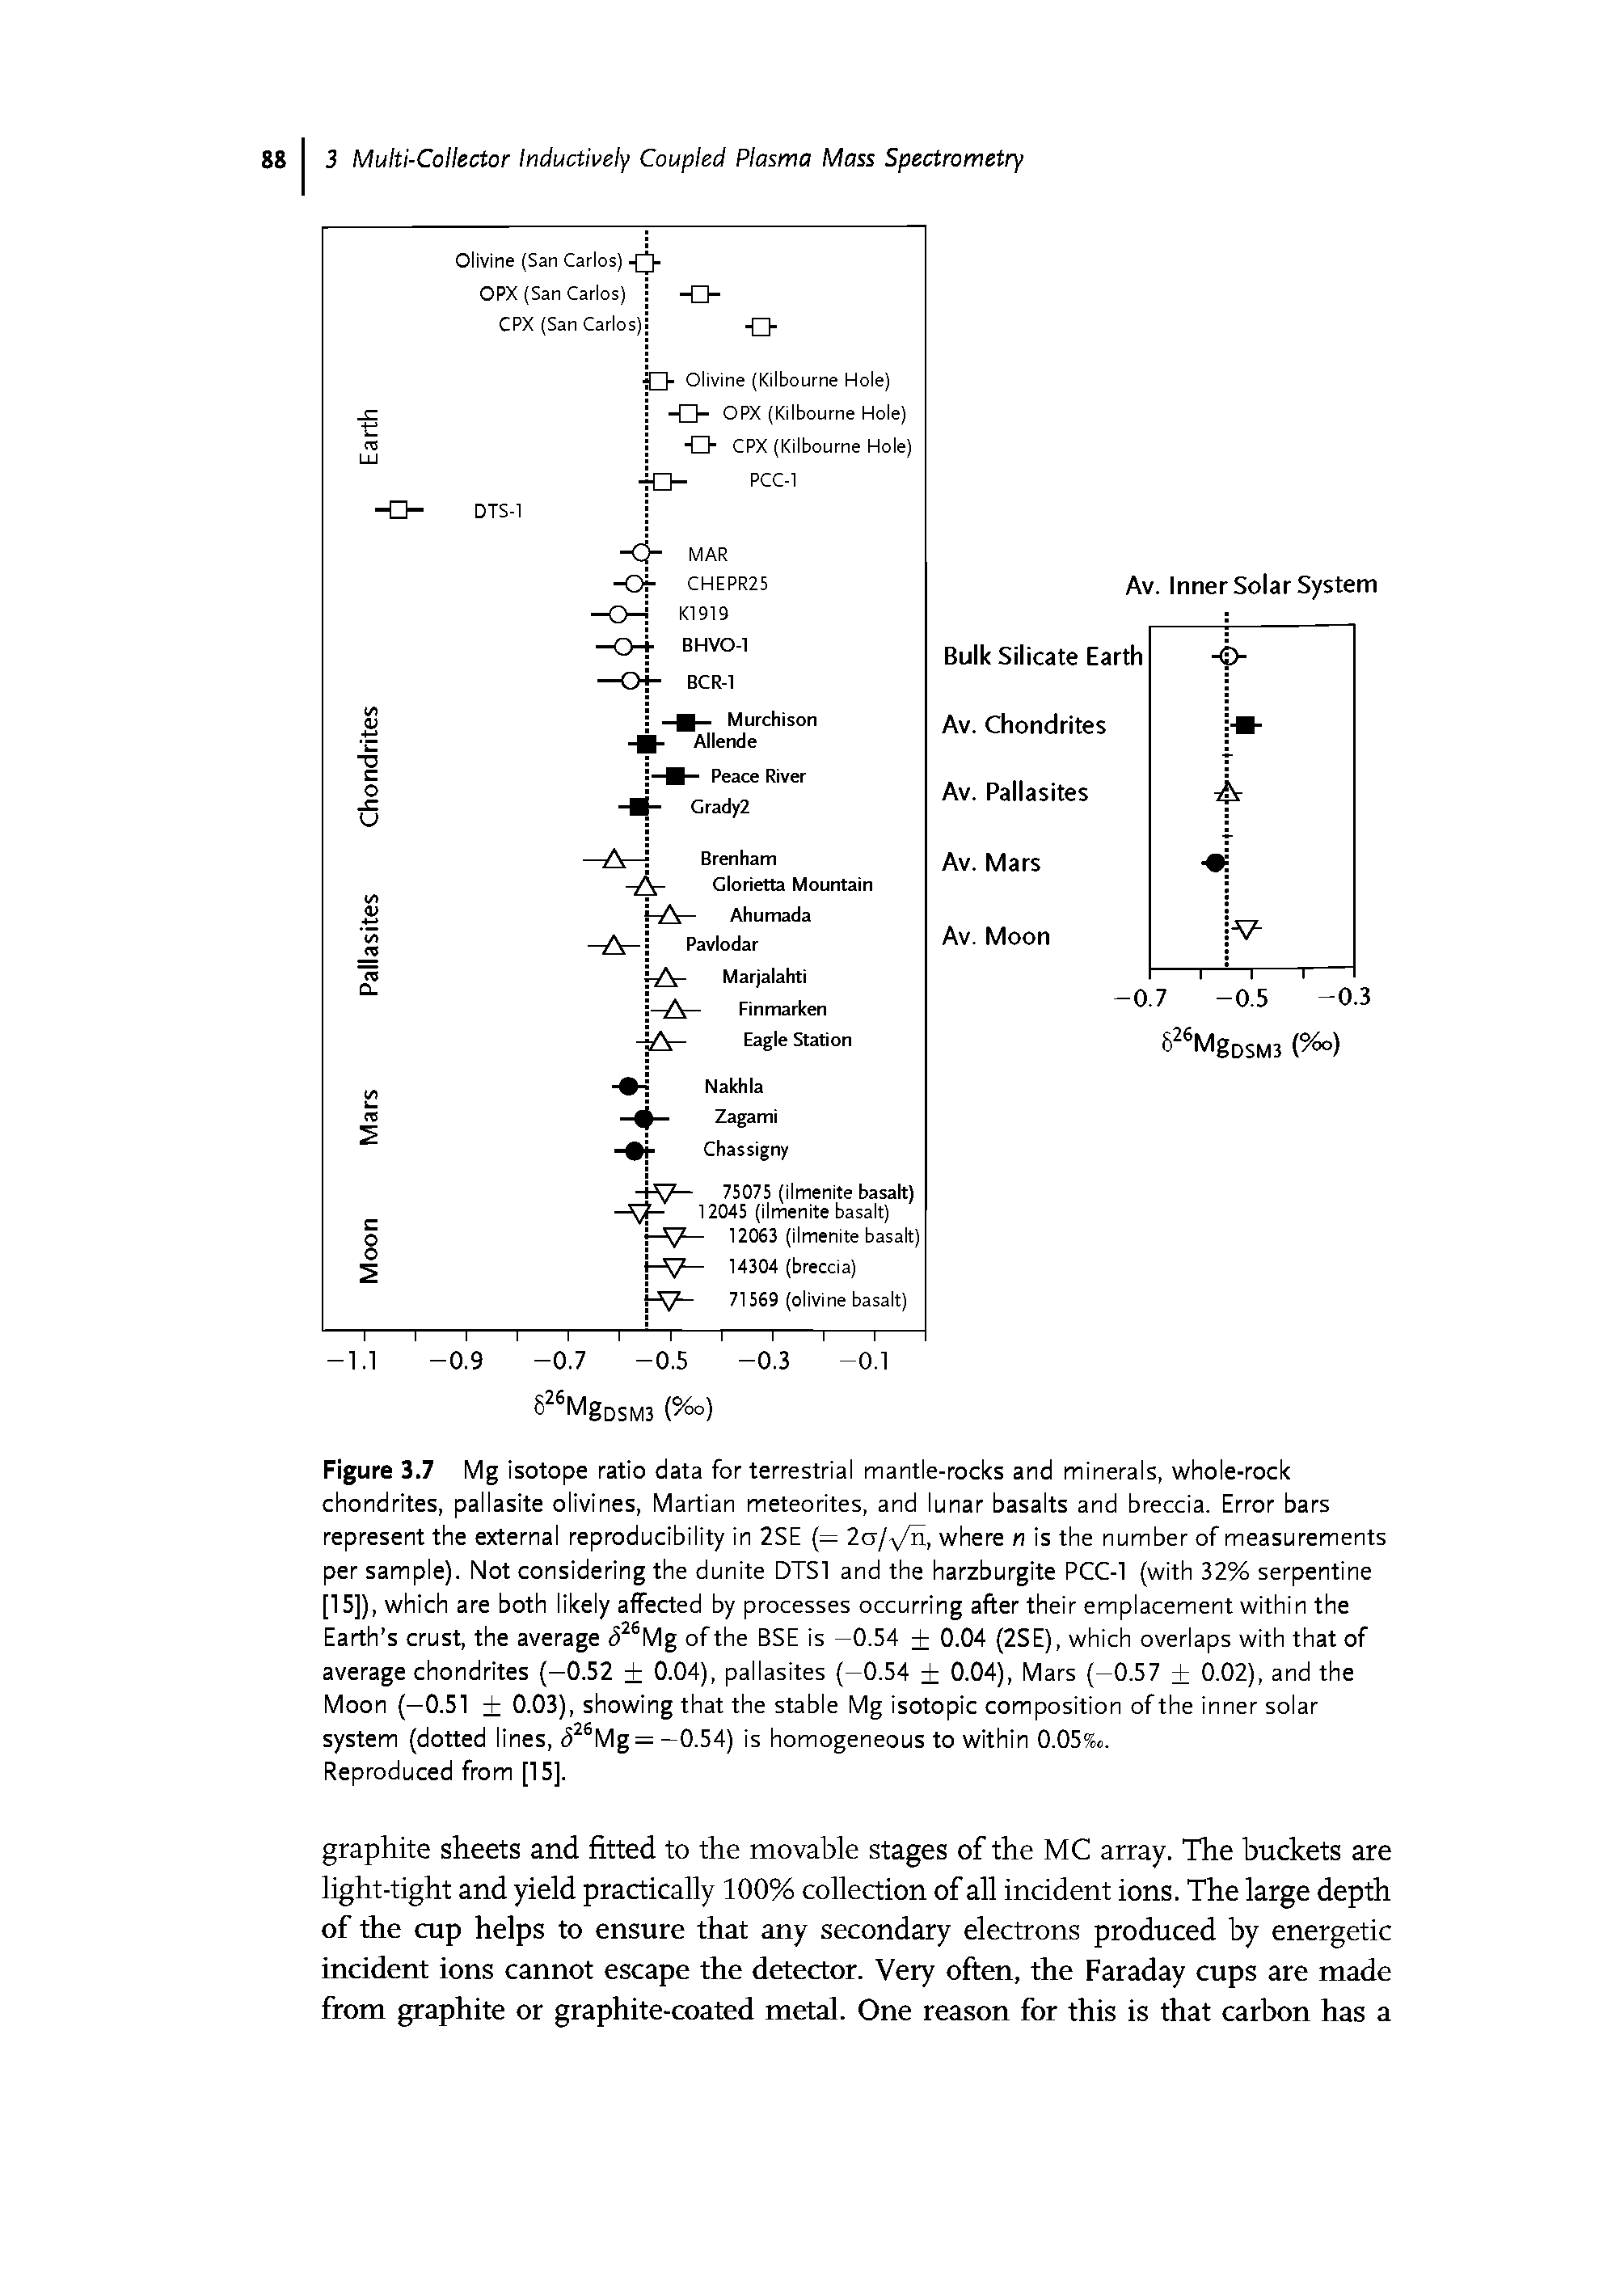 Figure 3.7 Mg isotope ratio data for terrestrial mantle-rocks and minerals, whole-rock chondrites, pallasite olivines, Martian meteorites, and lunar basalts and breccia. Error bars represent the external reproducibility in 2SE (= 2a/v/n, where n is the number of measurements per sample). Not considering the dunite DTSl and the harzburgite PCC-1 (with 32% serpentine [15]), which are both likely affected by processes occurring after their emplacement within the Earth s crust, the average (5 Mg of the BSE is —0.54 + 0.04 (2SE), which overlaps with that of average chondrites (—0.52 + 0.04), pallasites (—0.54 + 0.04), Mars (—0.57 + 0.02), and the Moon (—0.51 0.03), showing that the stable Mg isotopic composition of the inner solar system (dotted lines, <5 Mg = —0.54) is homogeneous to within 0.05%o.